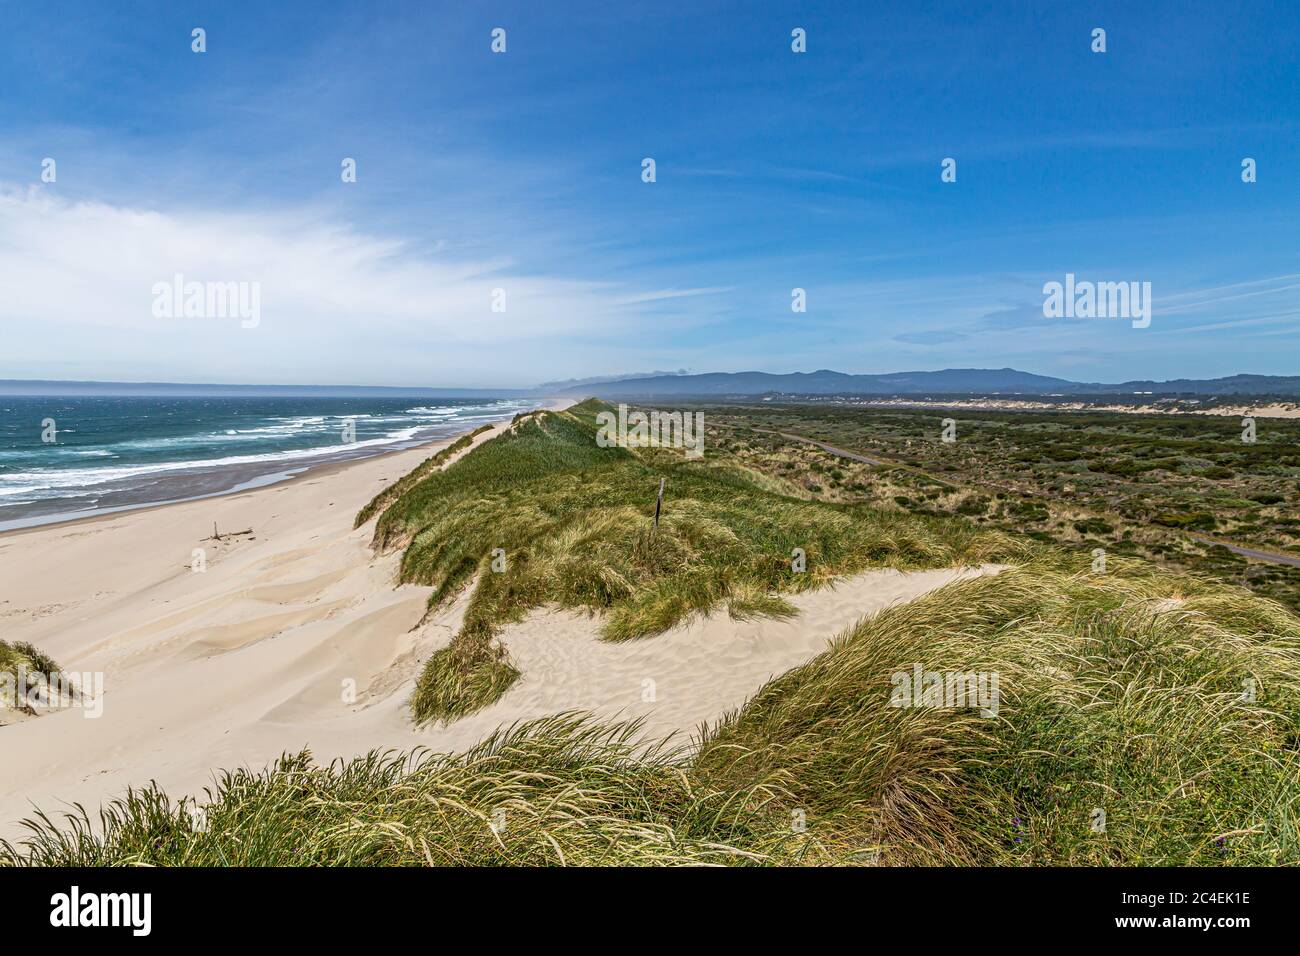 Looking out over sand dunes and the beach towards the ocean, on the Oregon coast Stock Photo